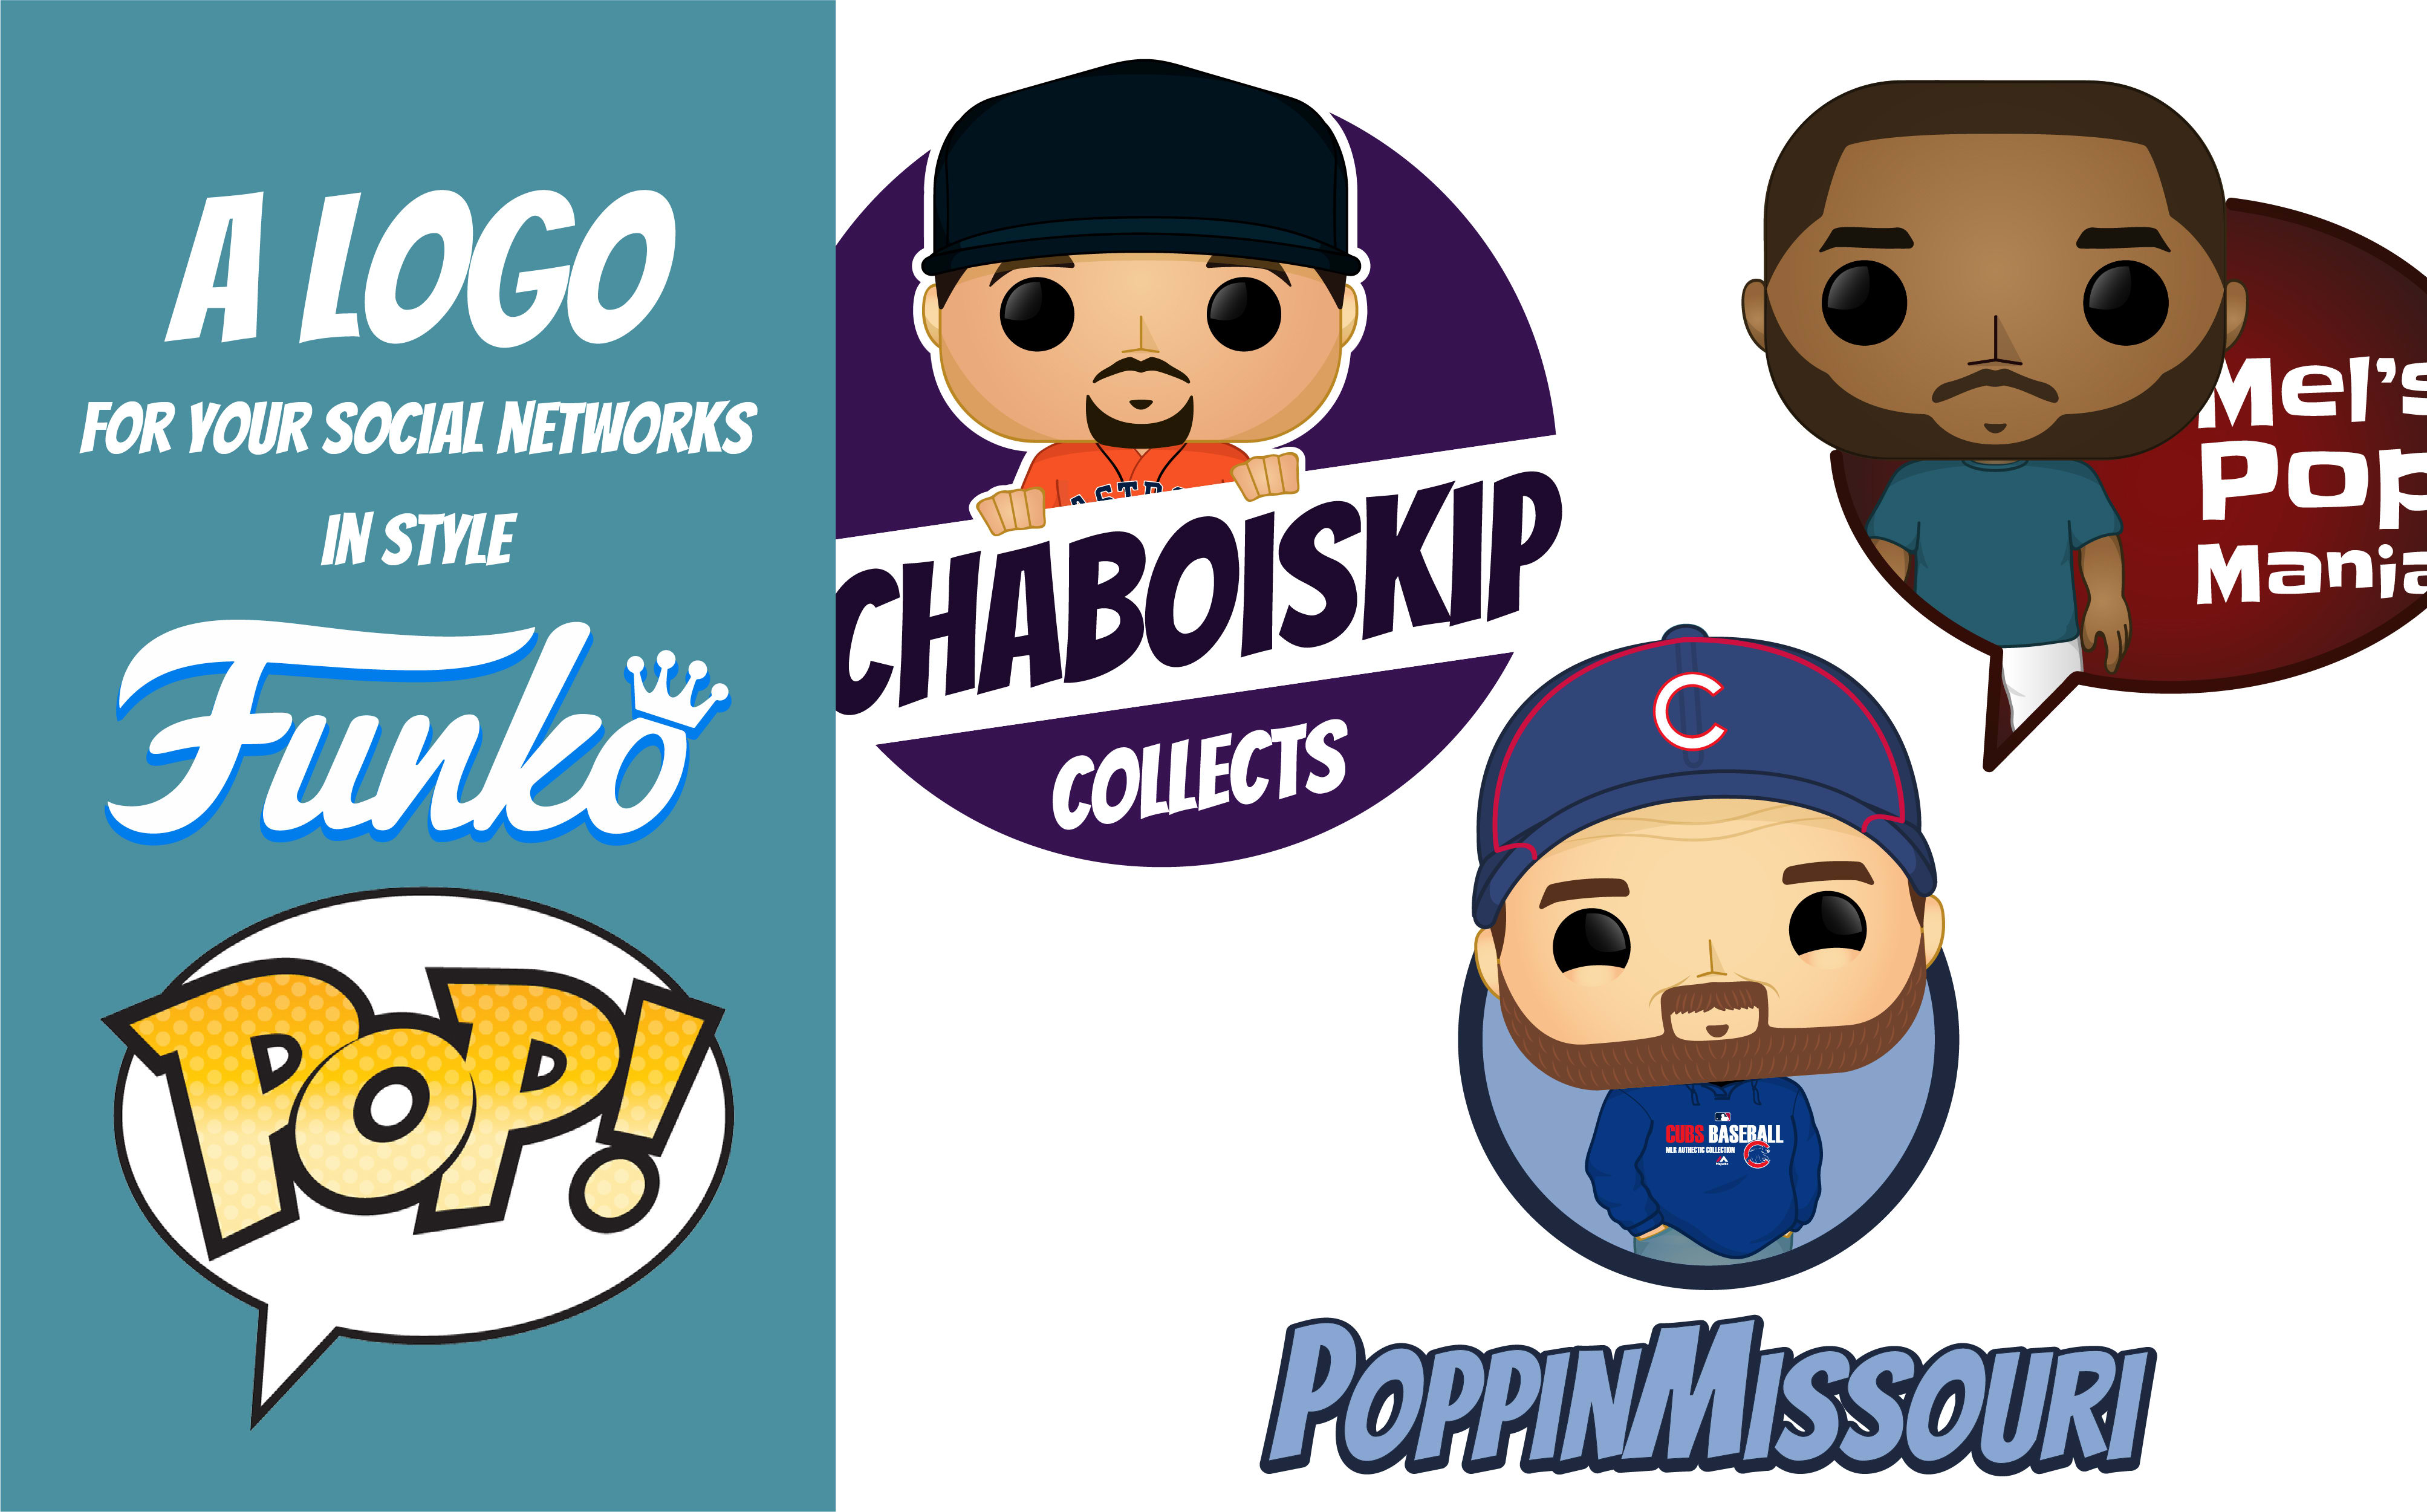 Make a logo in funko pop style for your social networks by Fedegonzalez580 Fiverr